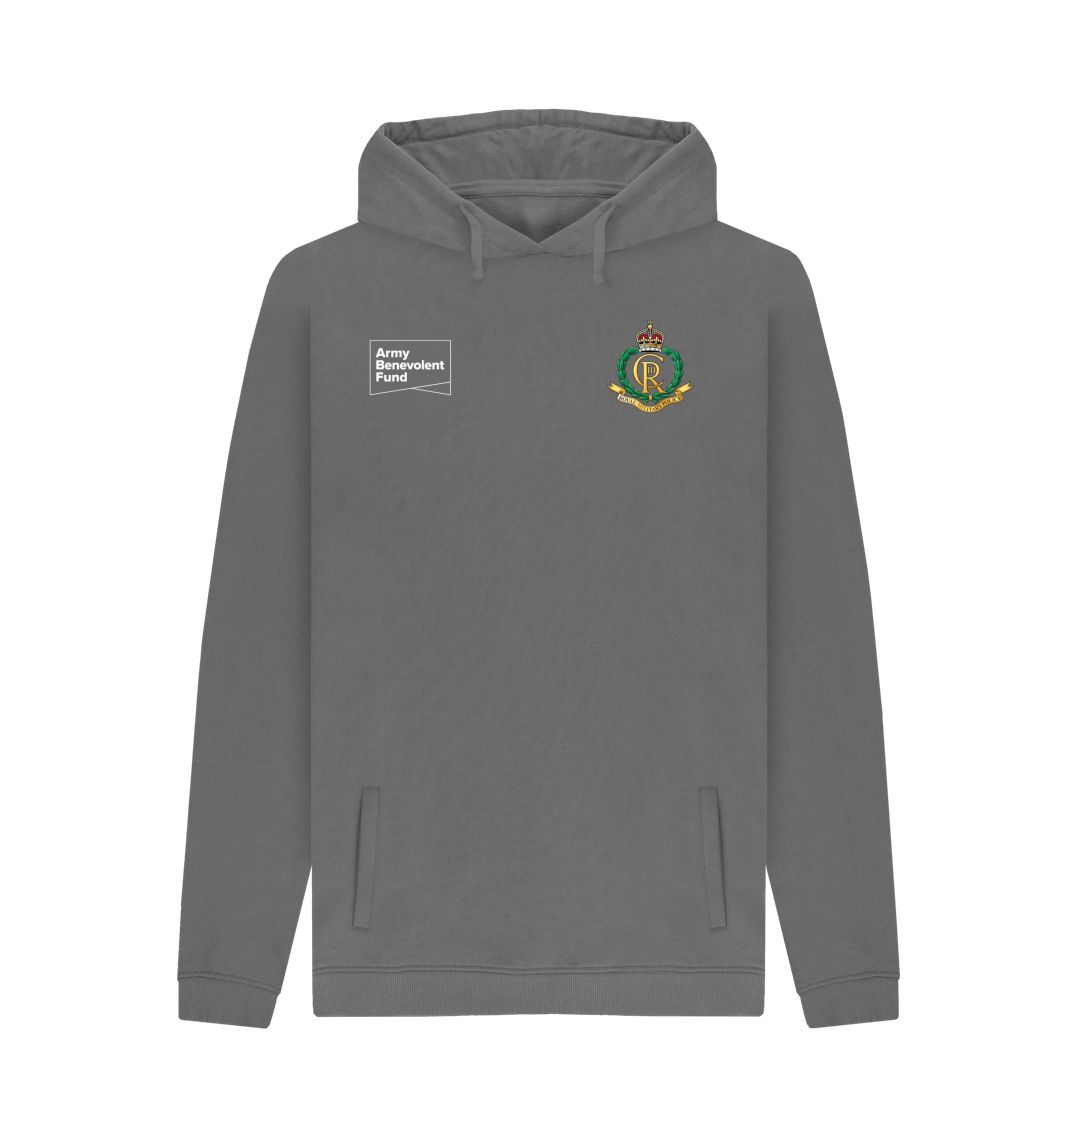 Adjutant General's Corps of Royal Military Police Unisex Hoodie - Army Benevolent Fund